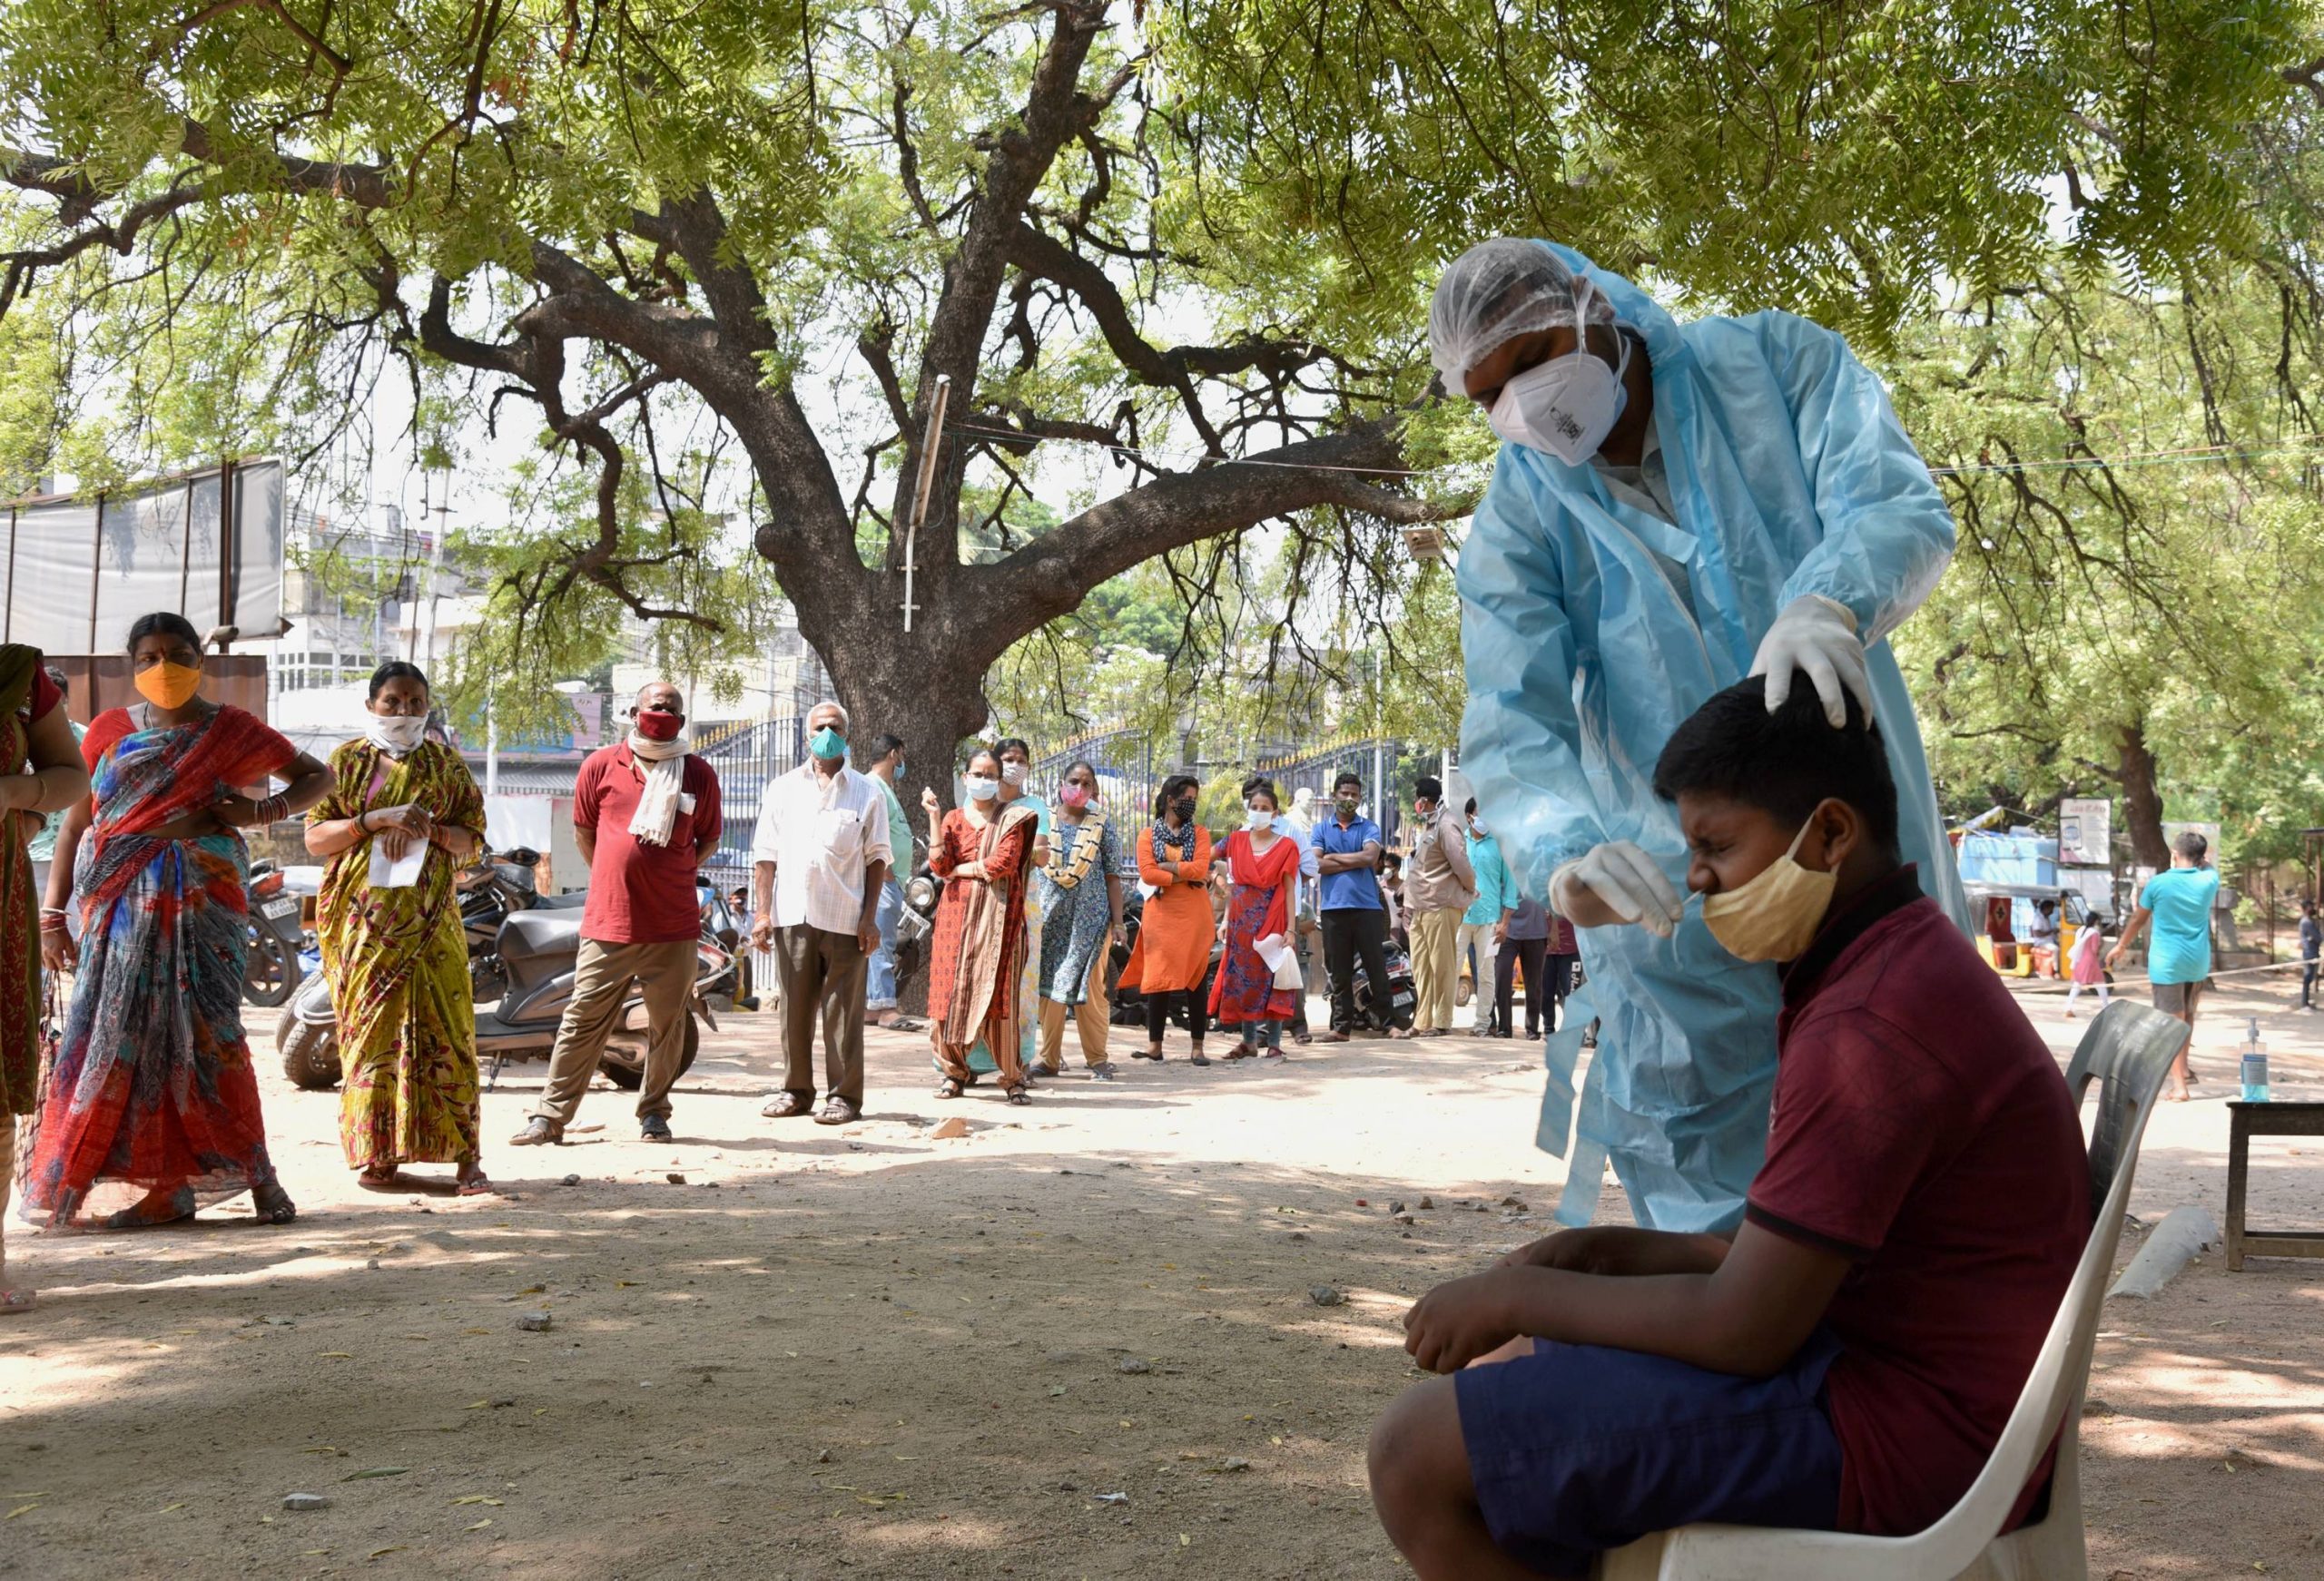 India records 127,510 new COVID-19 cases, lowest in 54 days